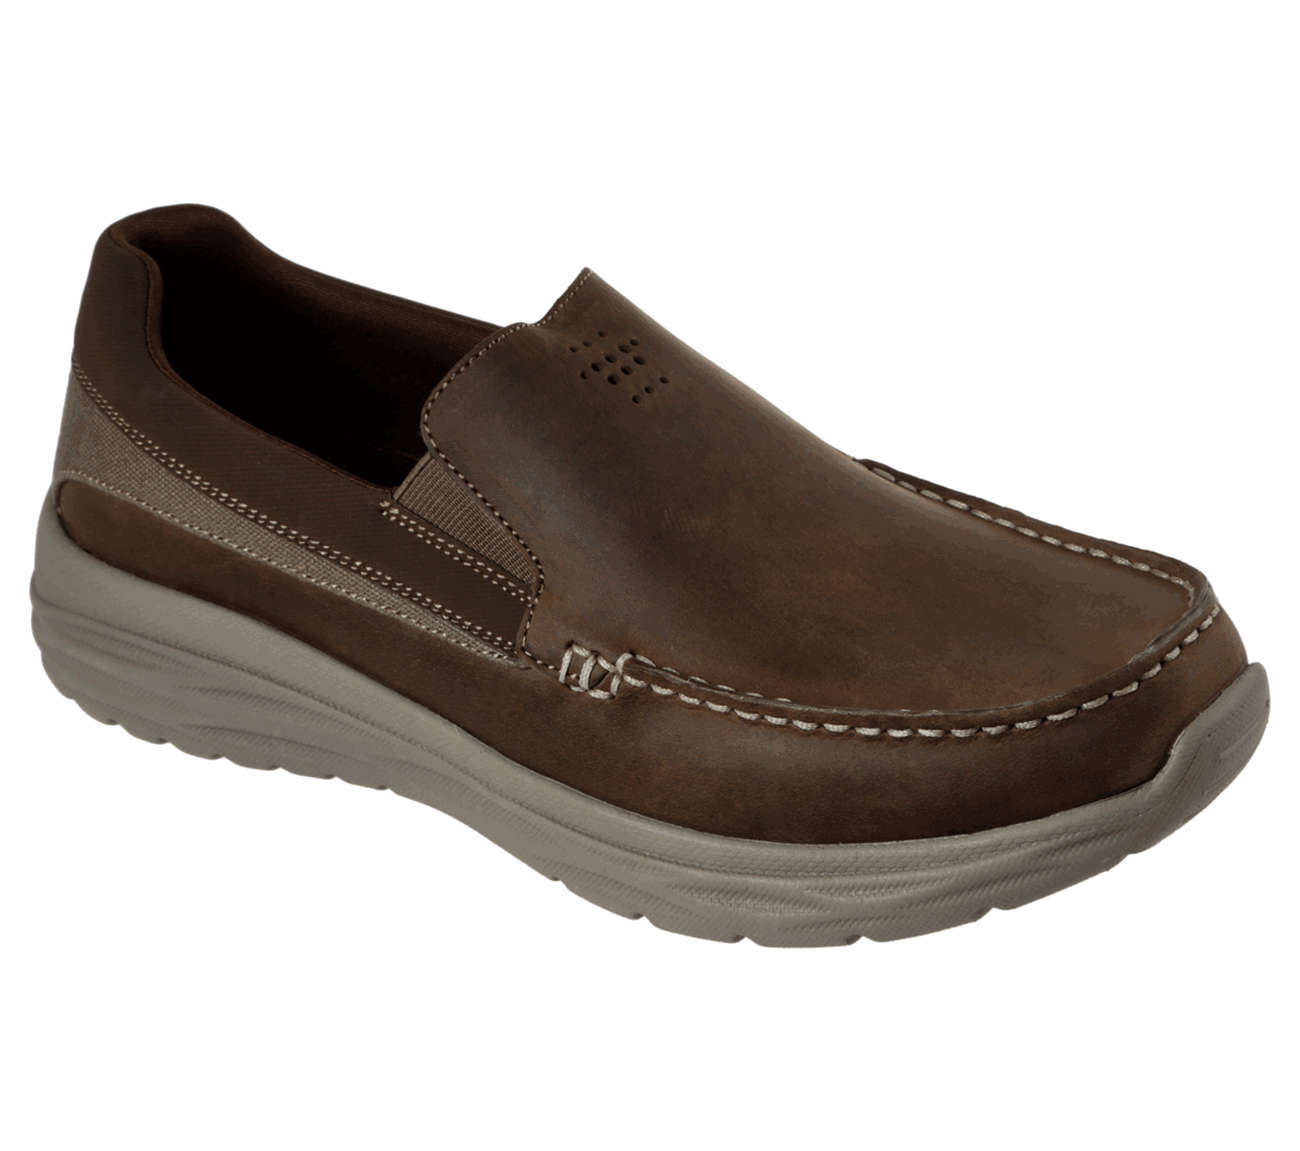 SKECHERS Harsen - Ortego USA Casuals Shoes